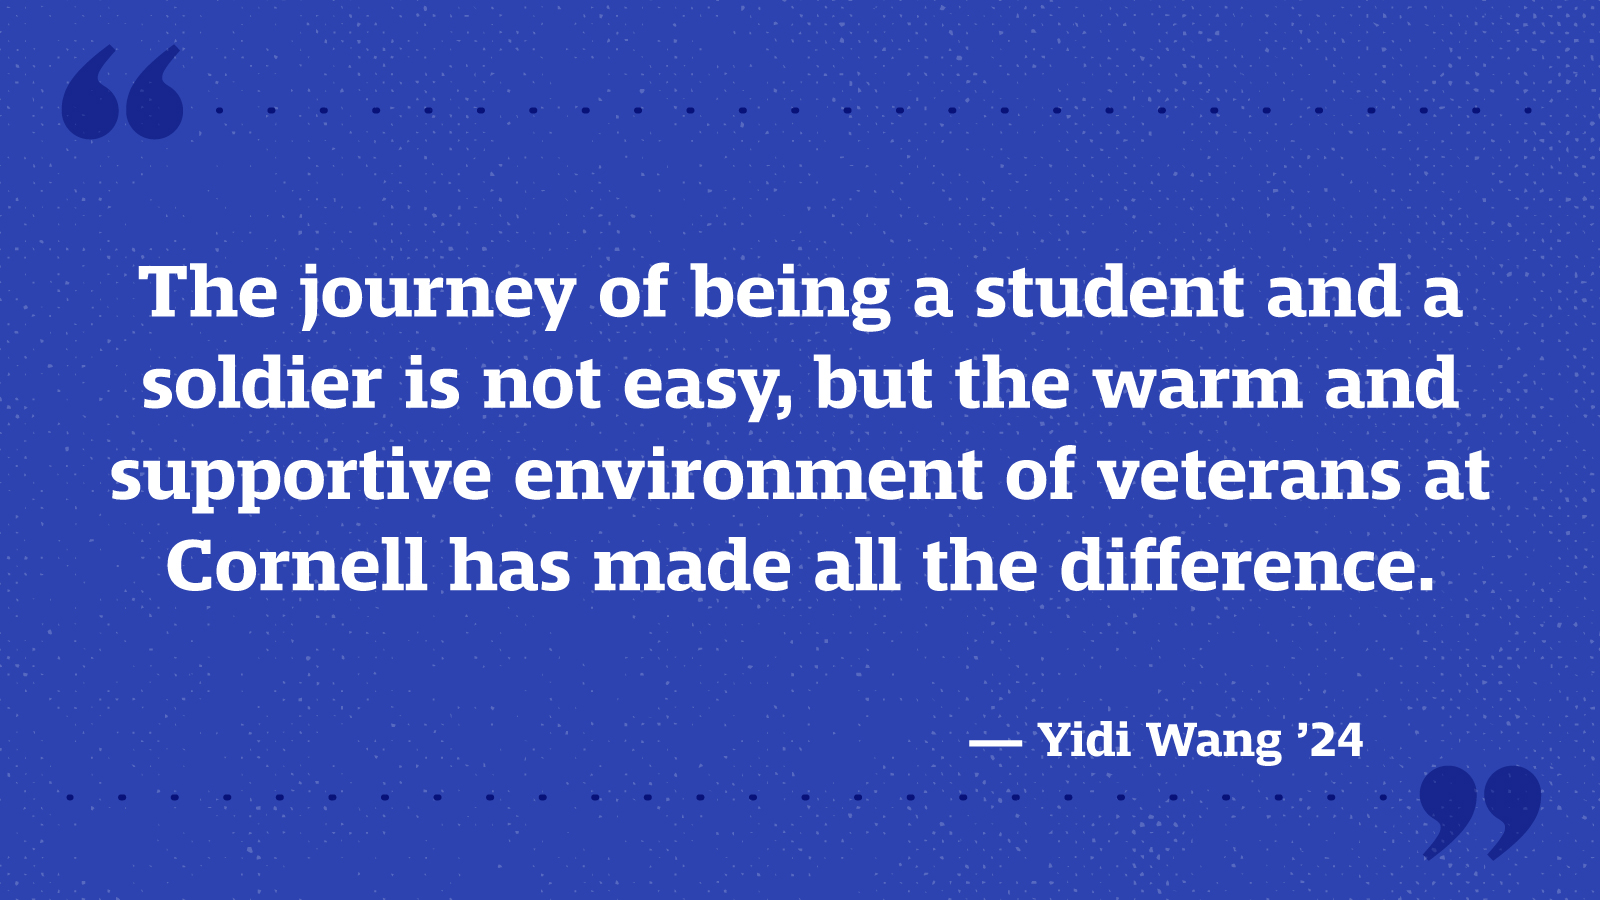 The journey of being a student and a soldier is not easy, but the warm and supportive environment of veterans at Cornell have made all the difference. — Yidi Wang ’24